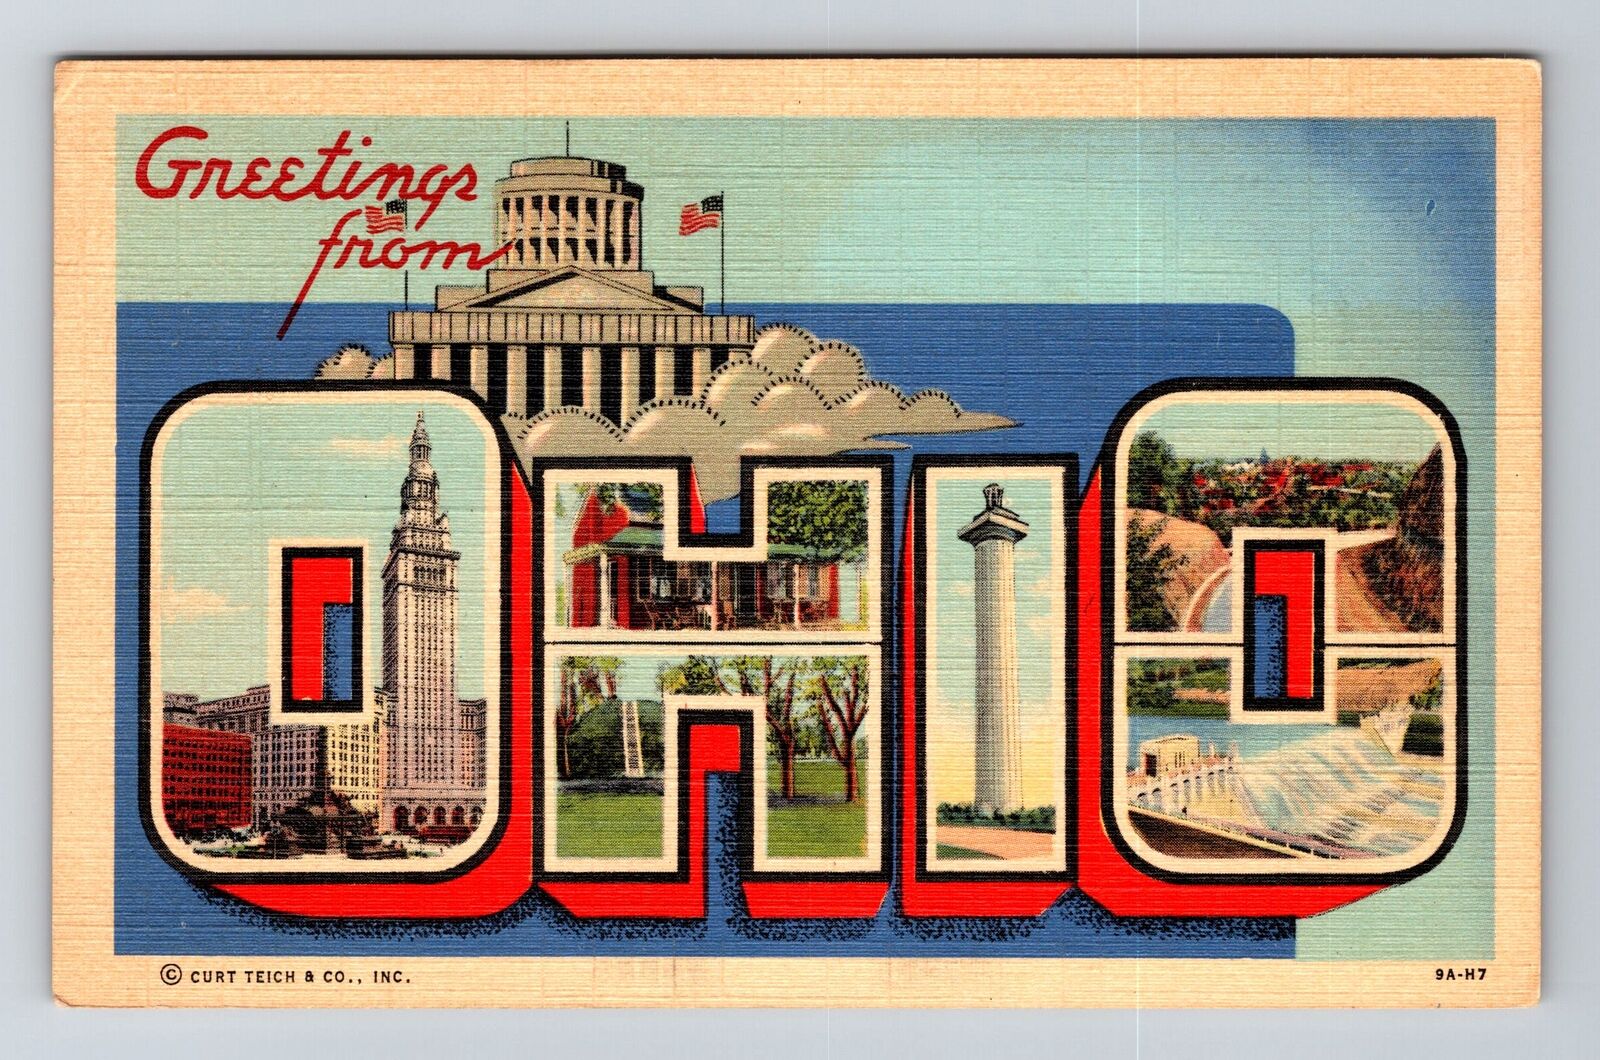 LARGE LETTER Greetings From Ohio Vintage Souvenir Postcard